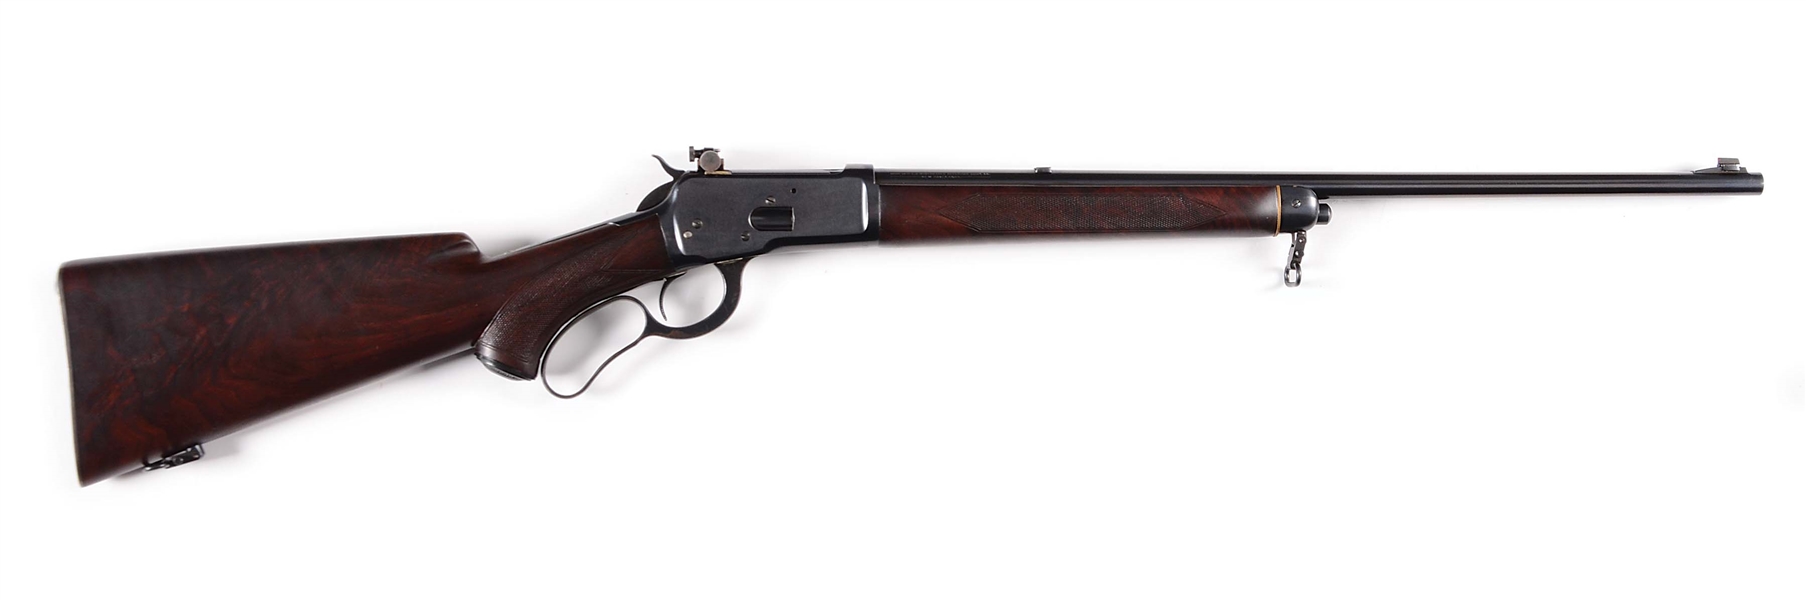 (C) DELUXE PRE-WAR WINCHESTER MODEL 65 LEVER ACTION RIFLE (1935).